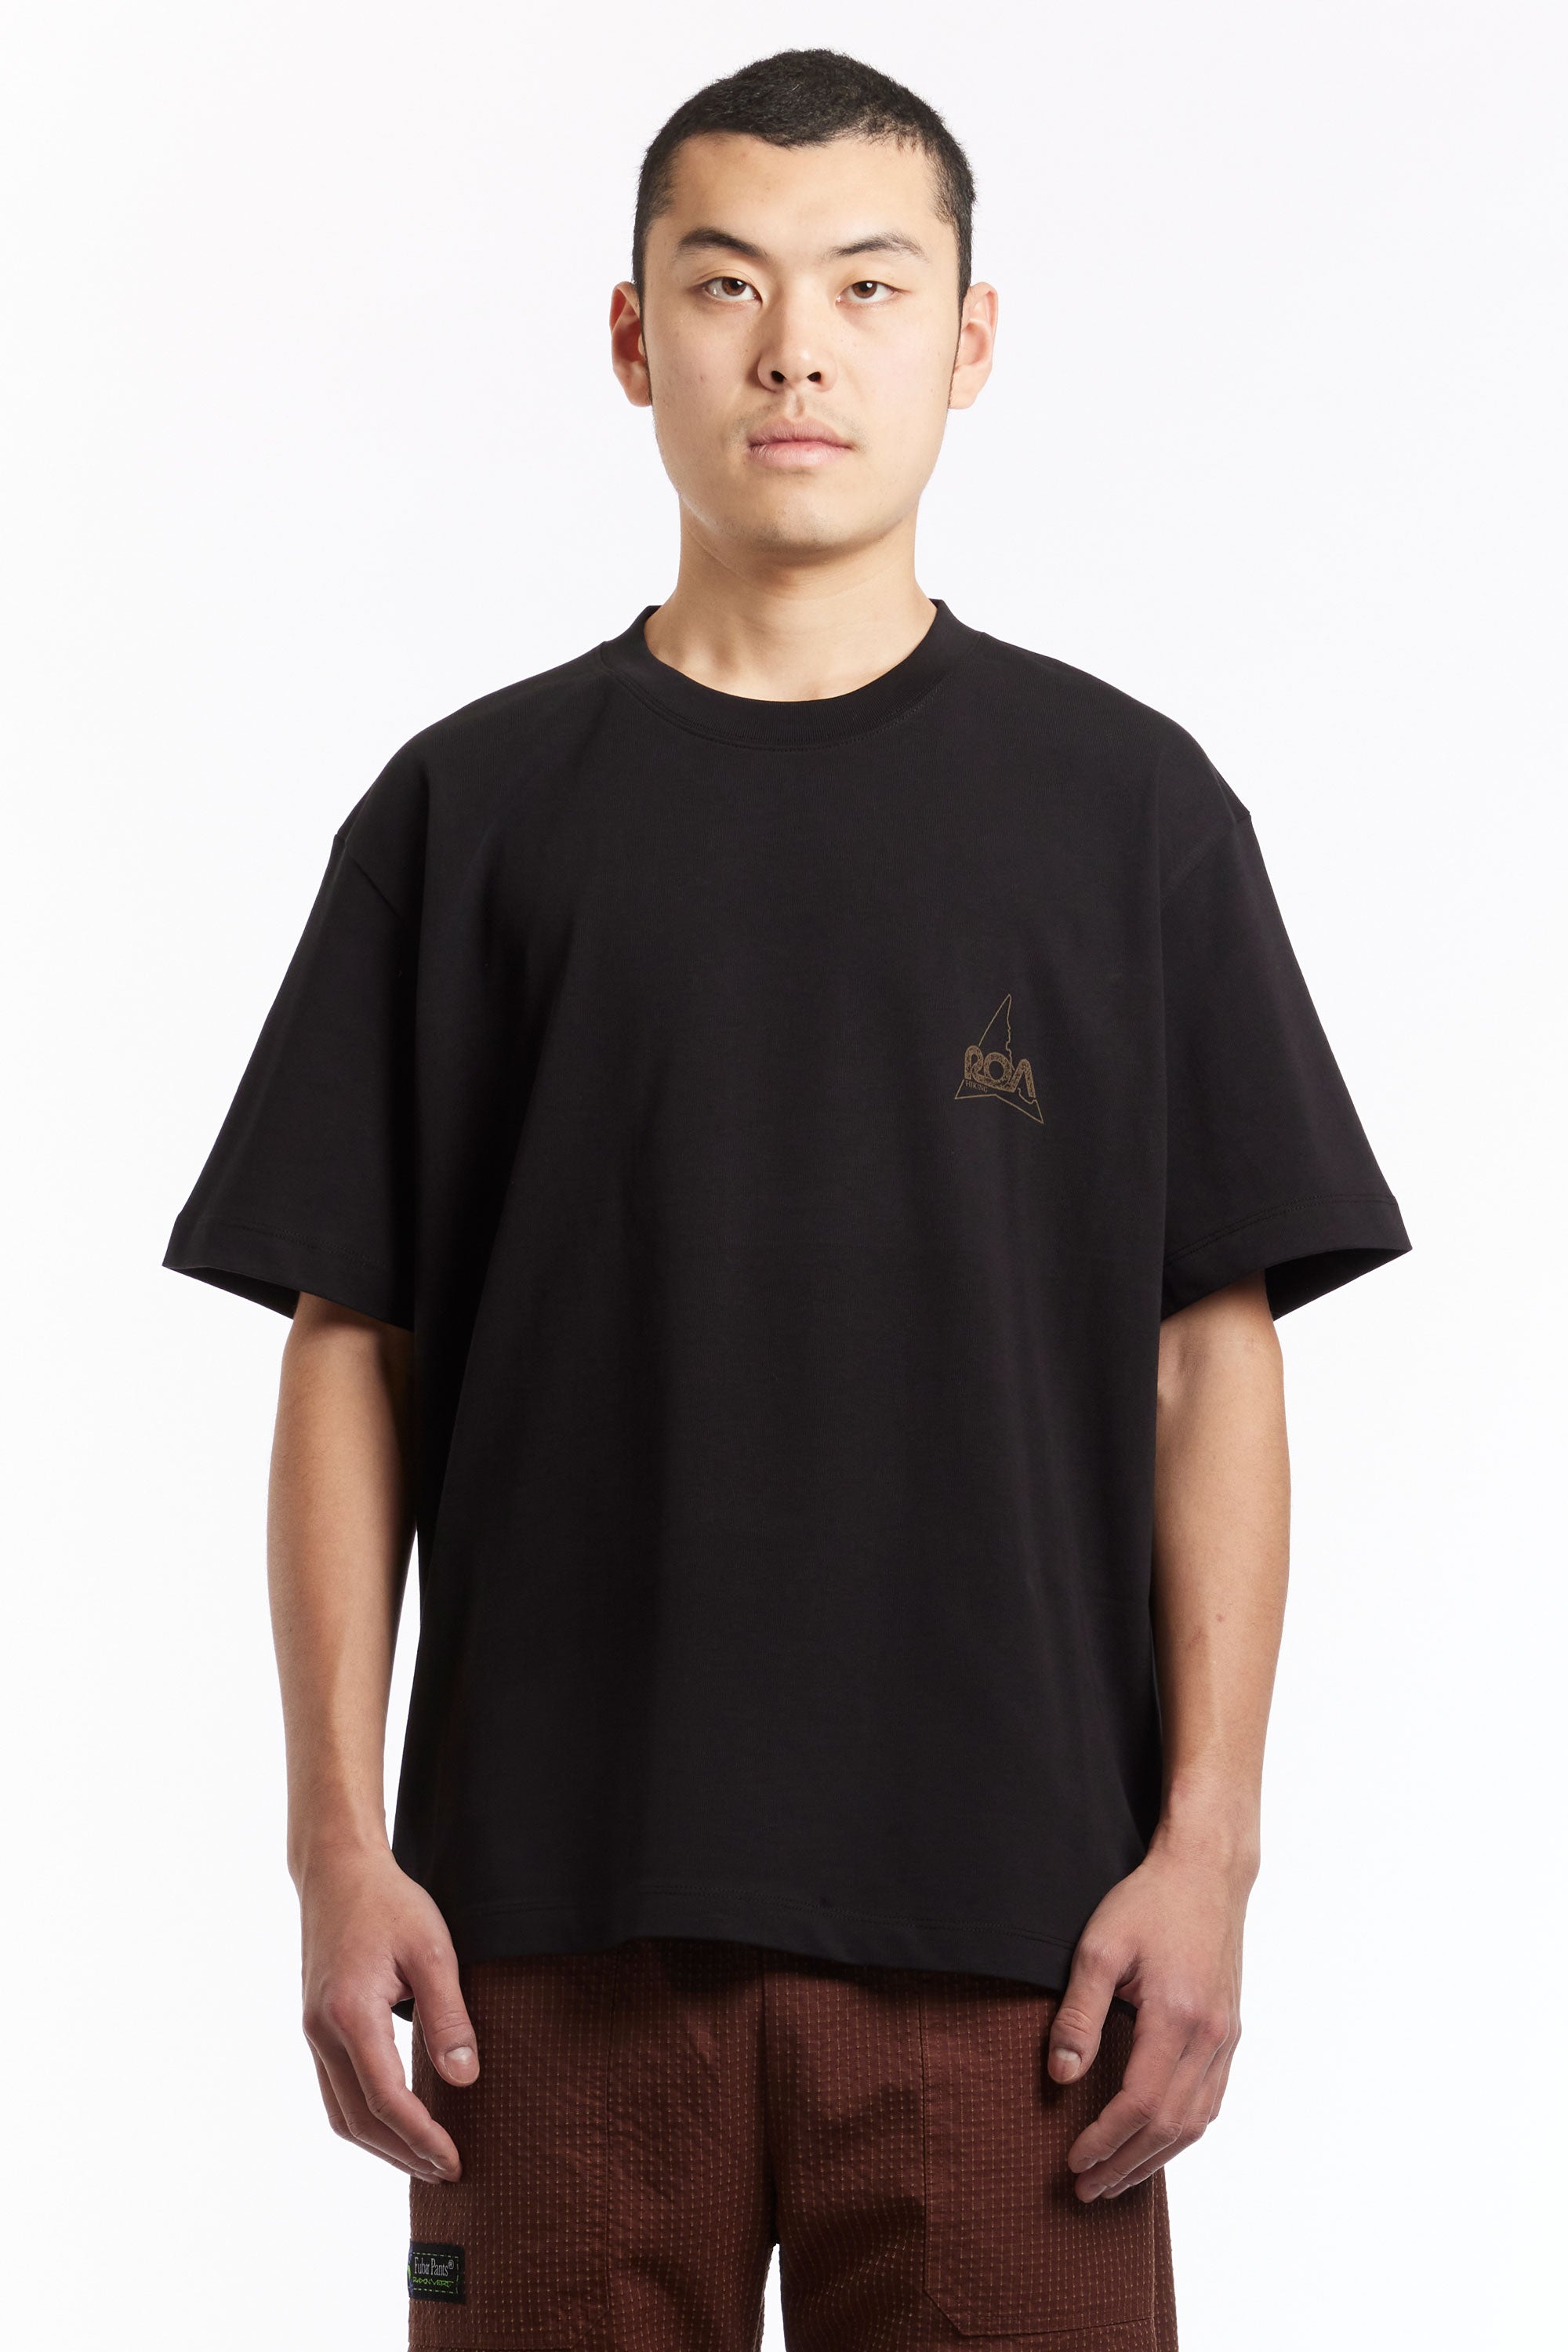 The ROA - BLACK SHORTLEEVE GRAPHIC T-SHIRT  available online with global shipping, and in PAM Stores Melbourne and Sydney.